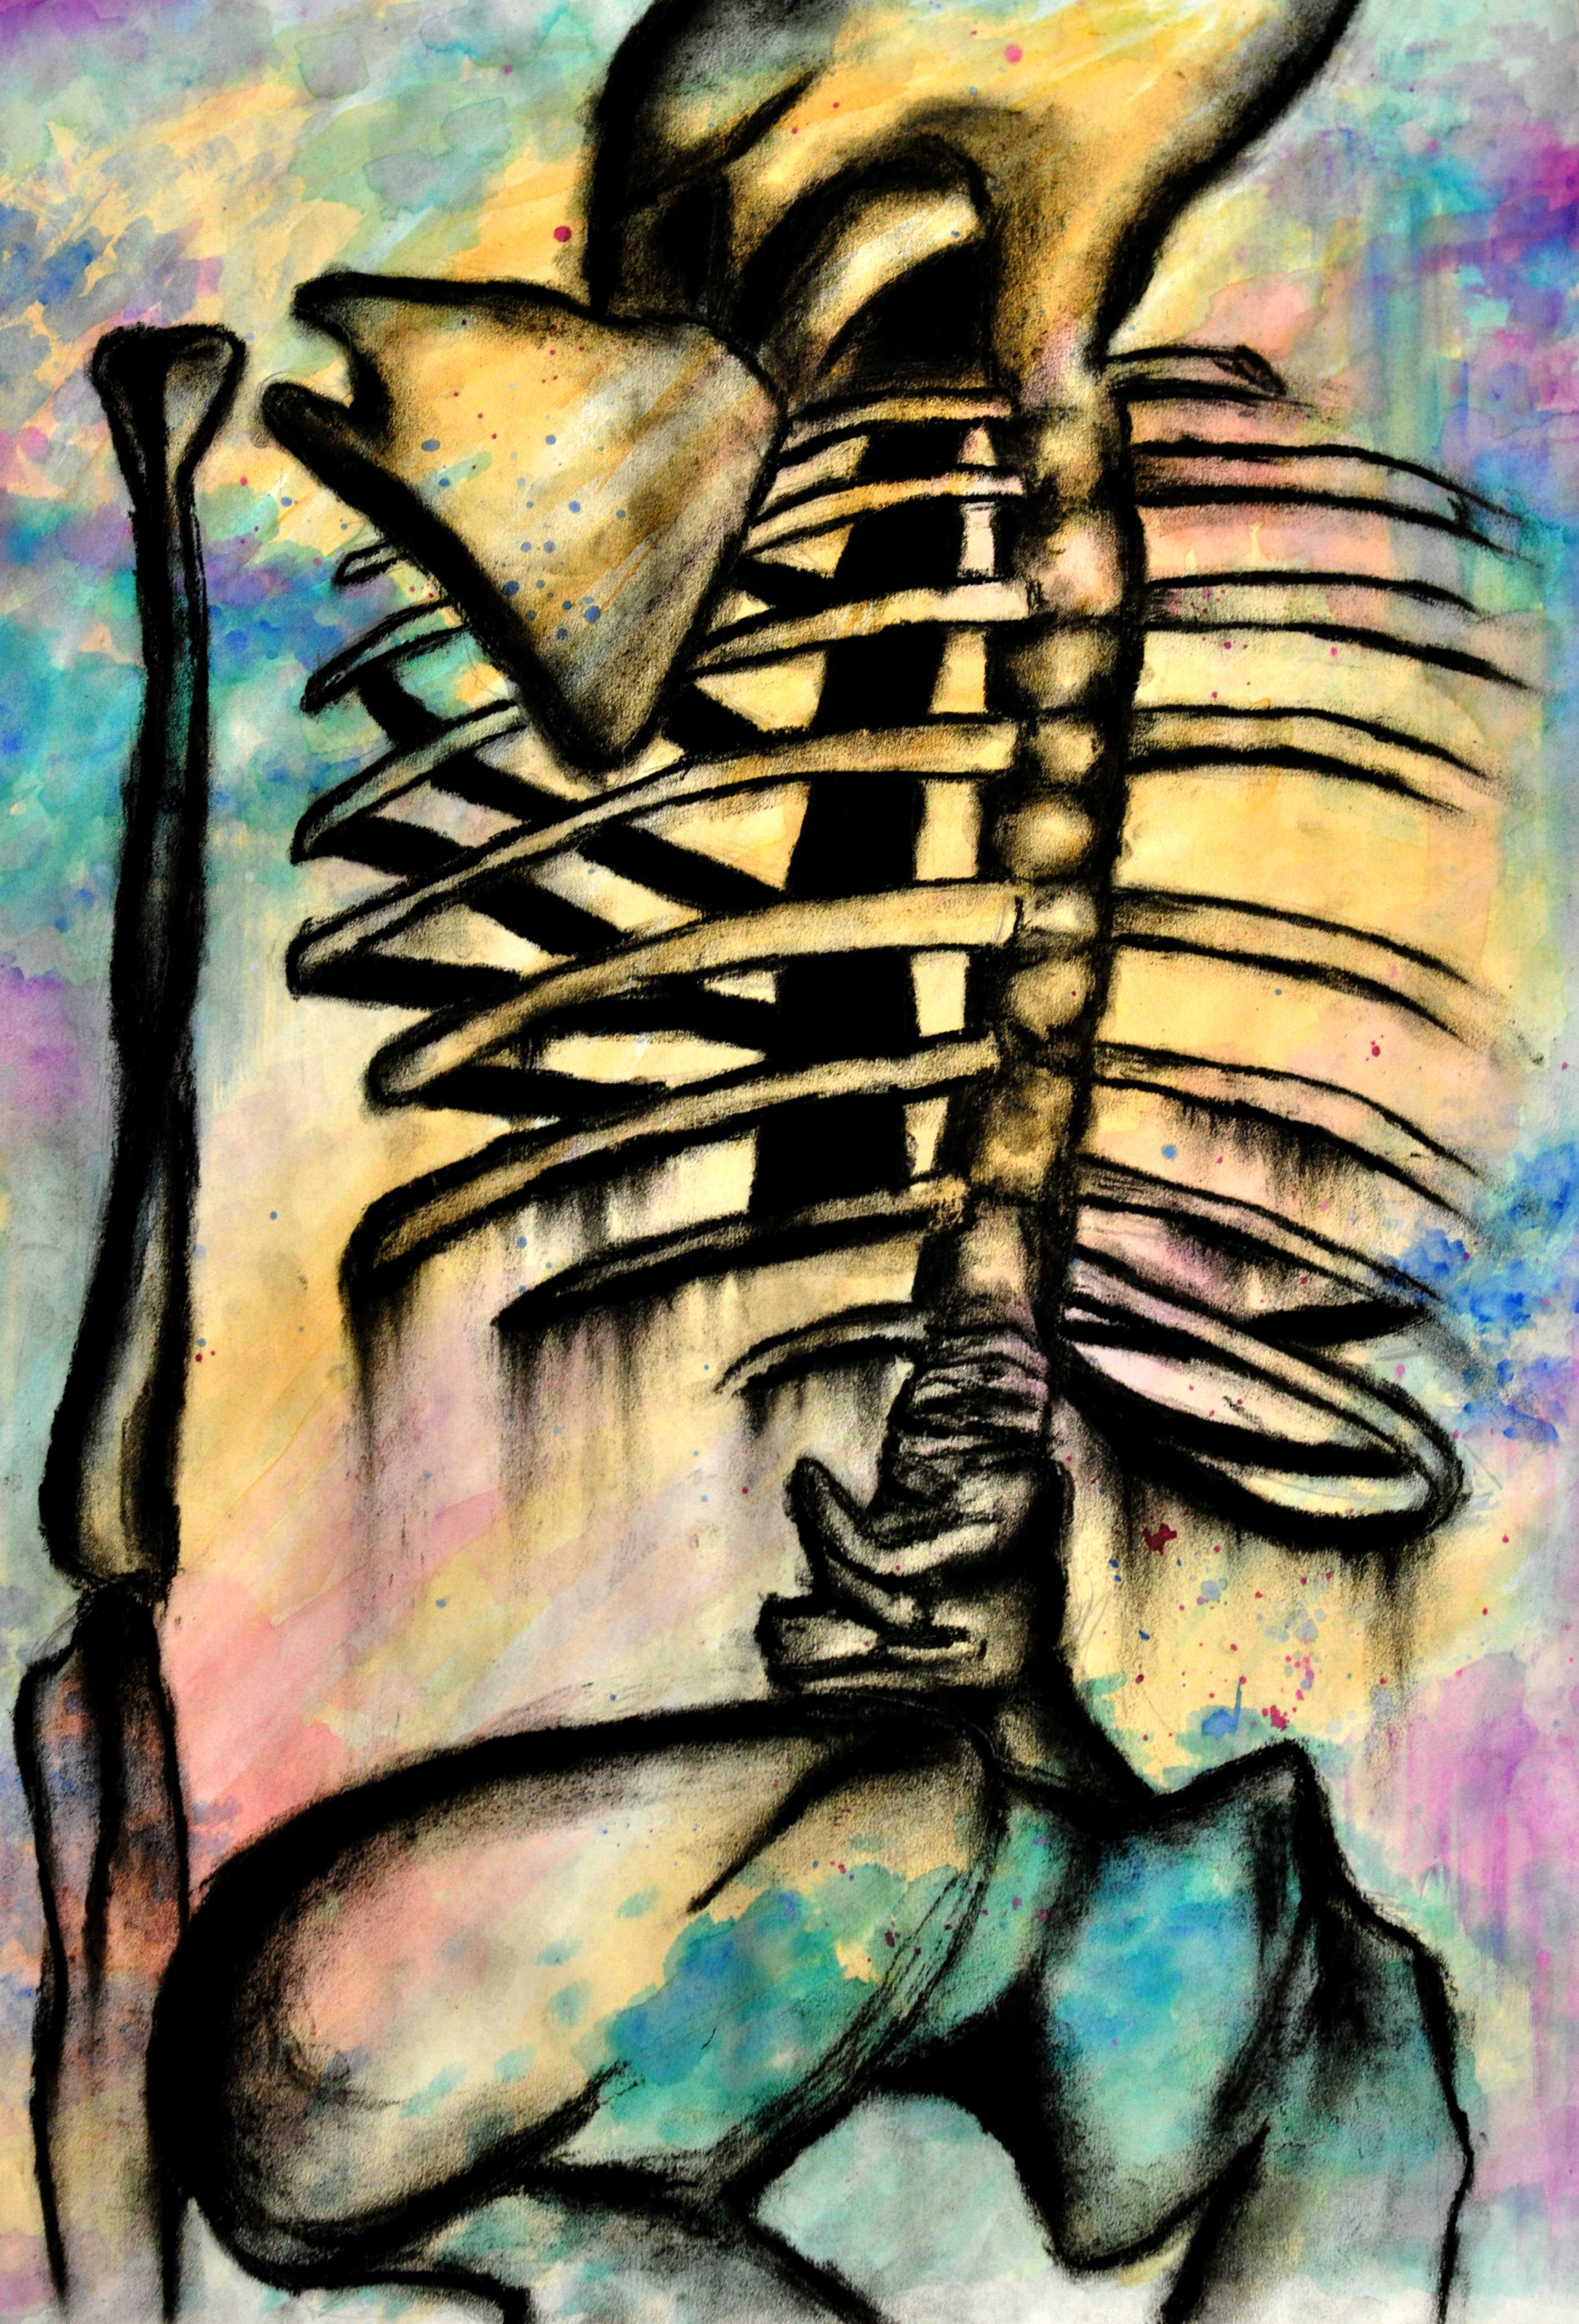 Skeleton created by Peggy Wang, sr., with charcoal and water colors.